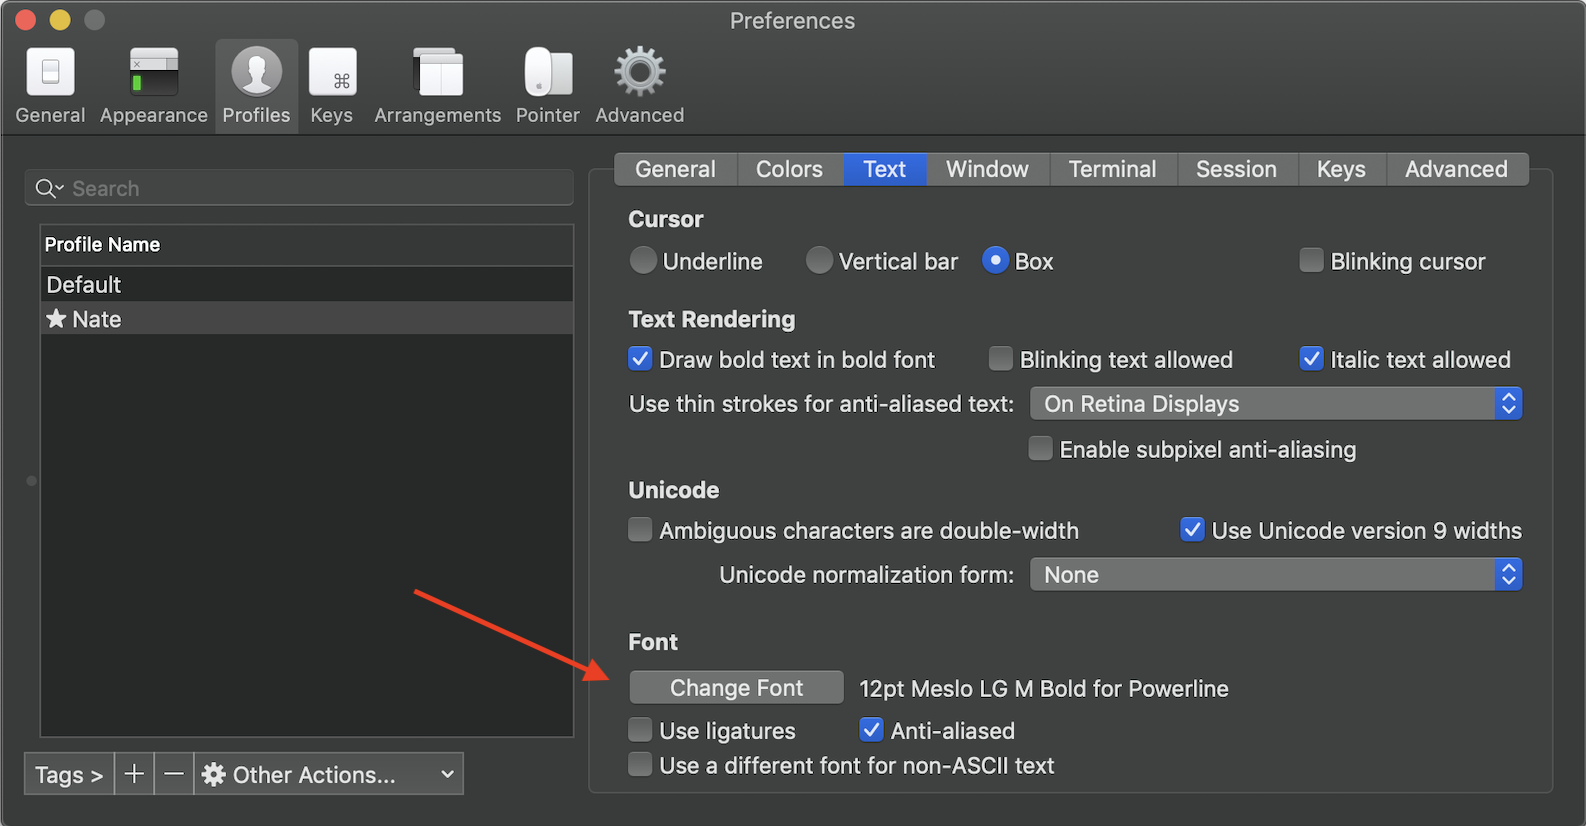 iTerm2 preferences to change font settings